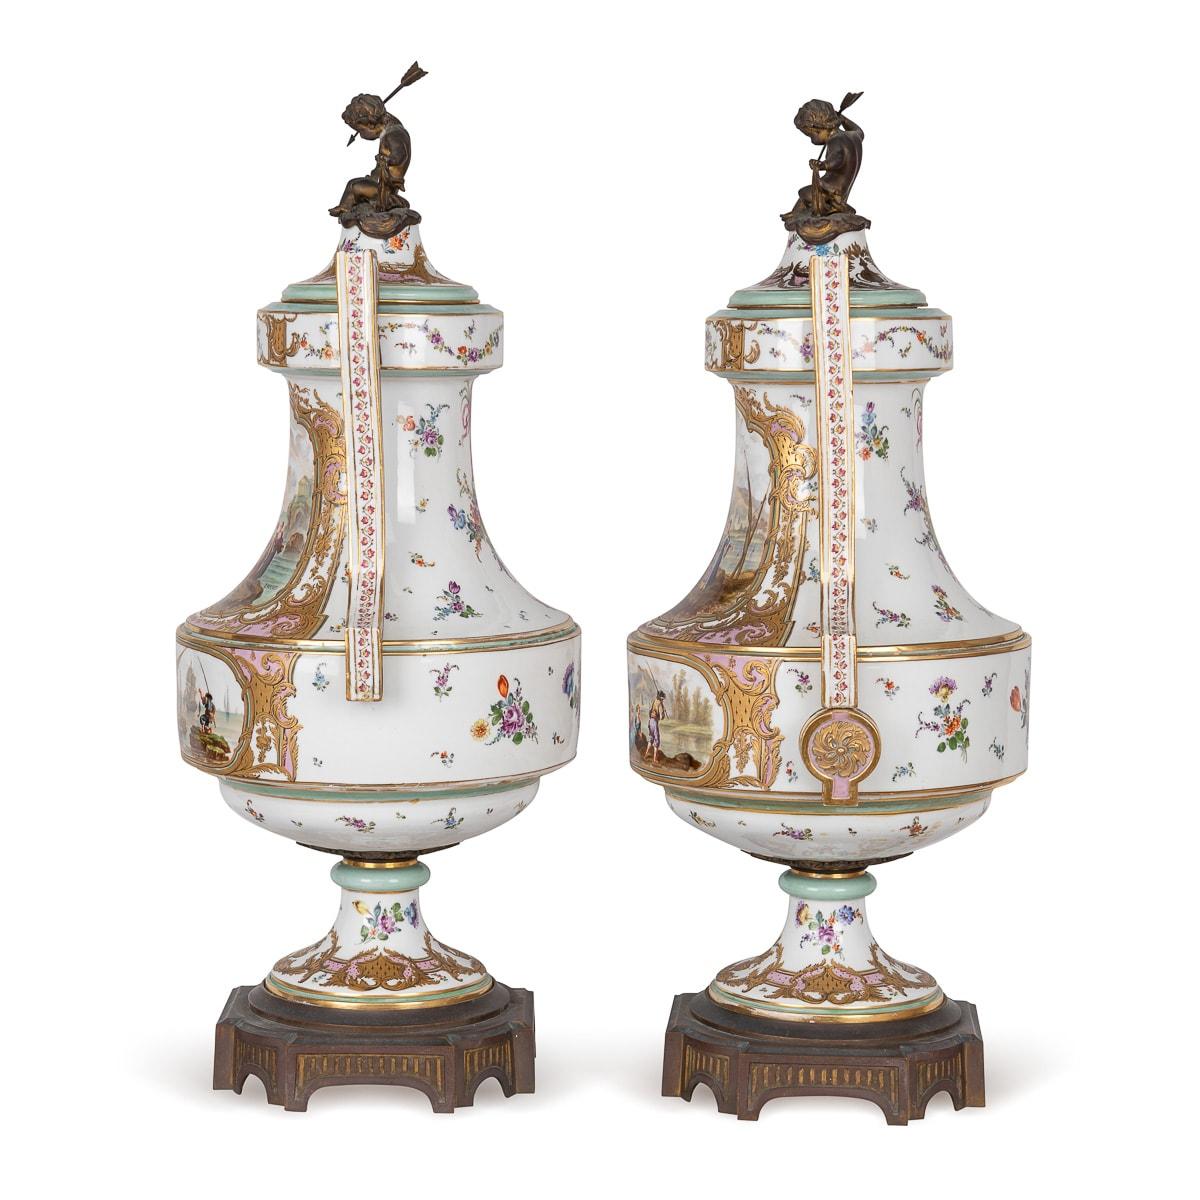 Antique 19th Century French Samson porcelain lidded vases feature intricate ormolu bronze mounts gracing both base and lid. The lids are crowned with cherub-shaped finials, adorned with delicate floral patterns cascading down to the base. Each vase